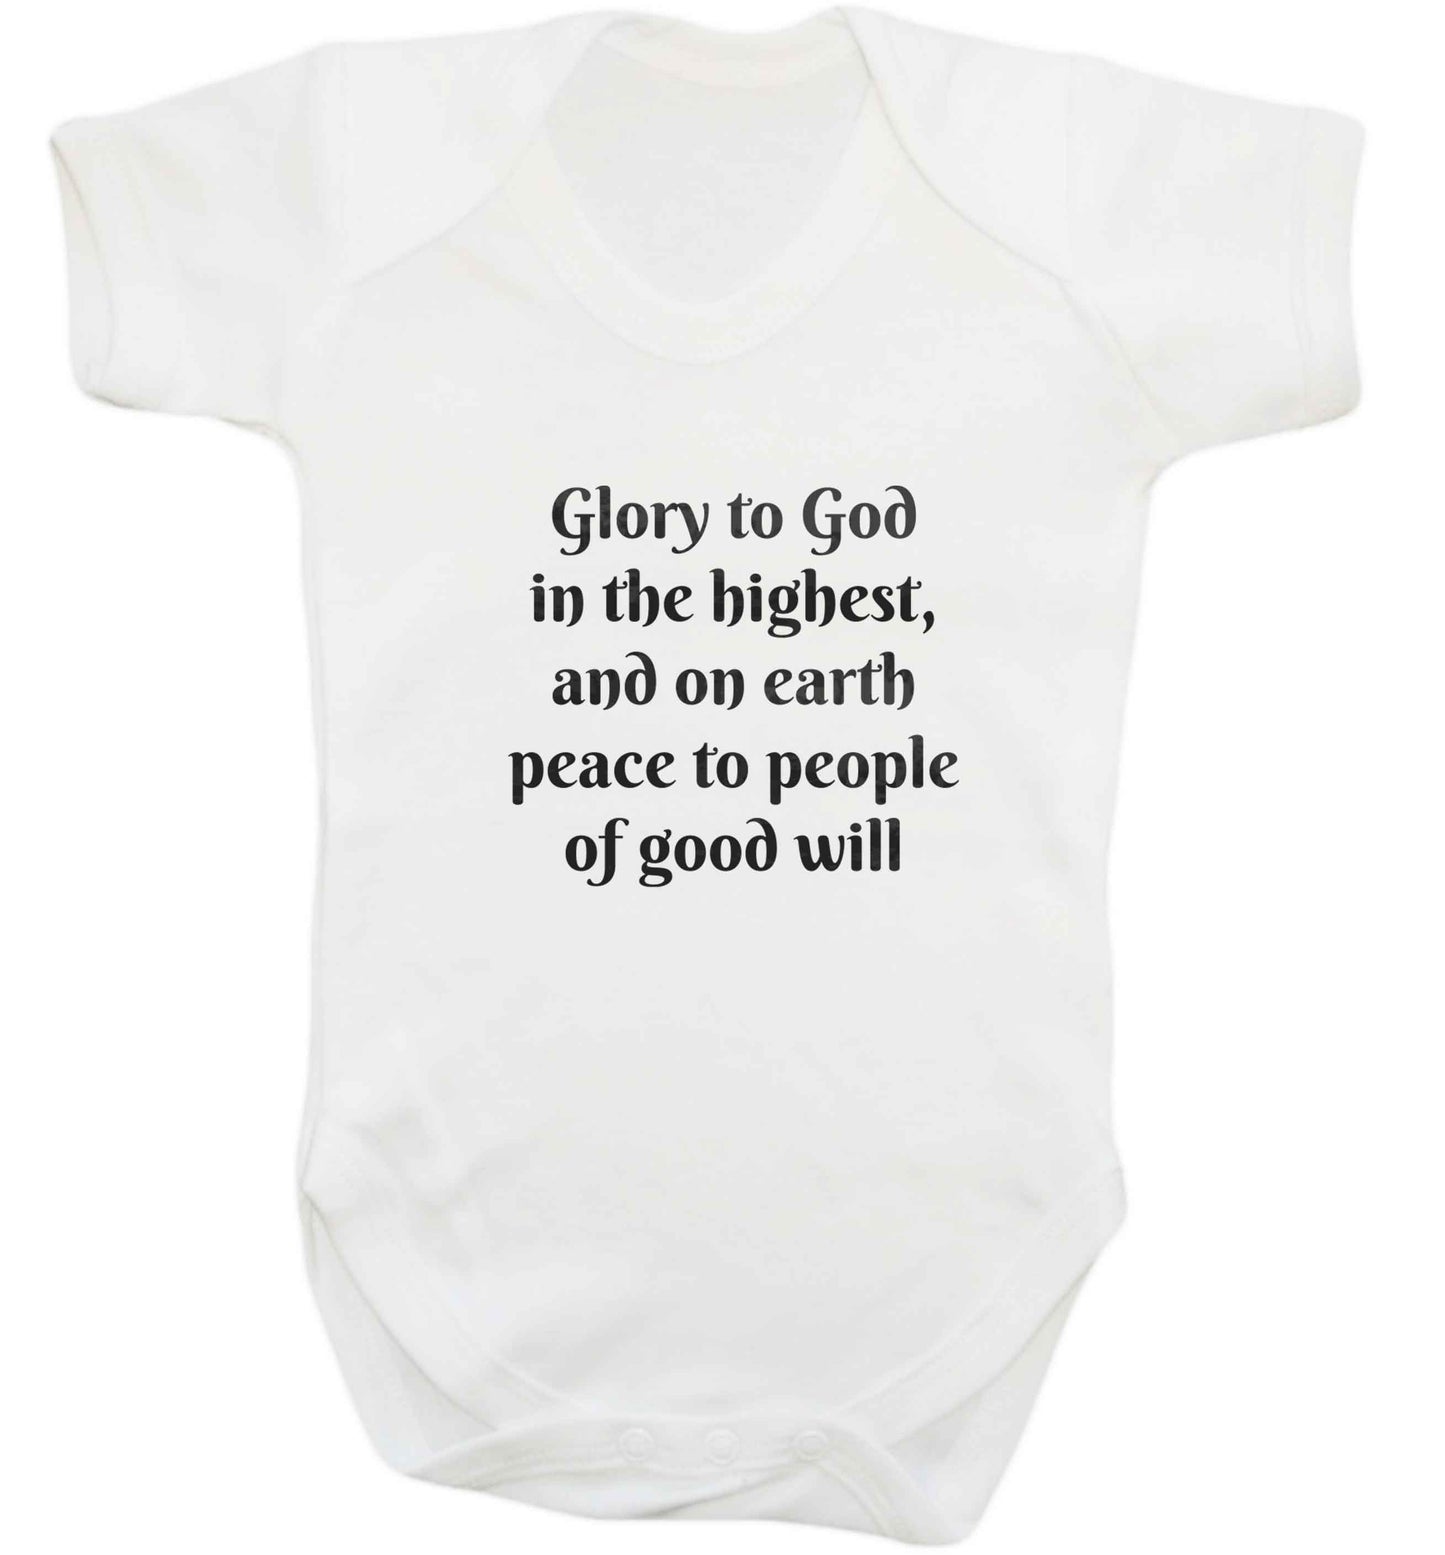 Glory to God in the highest, and on earth peace to people of good will baby vest white 18-24 months